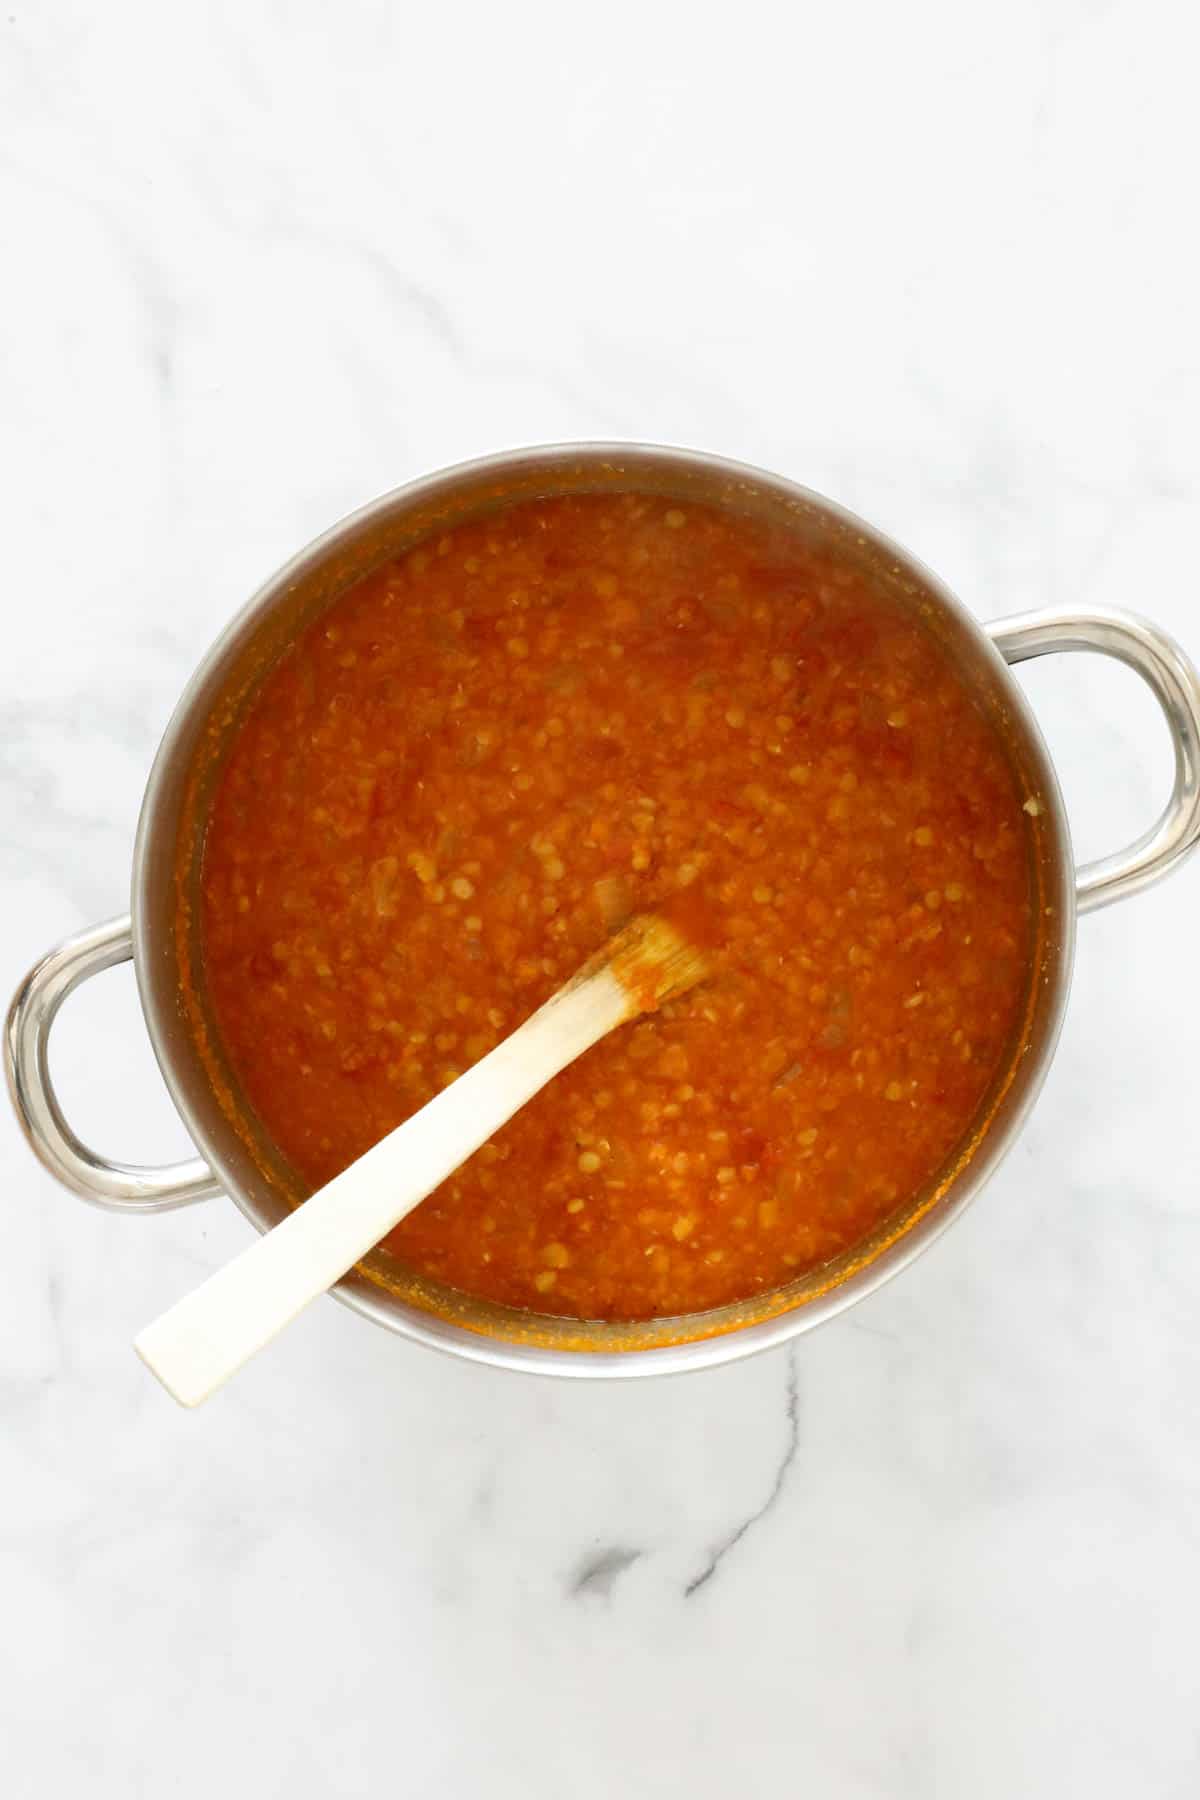 Lentils and stock added to carrot and spices in a pot.